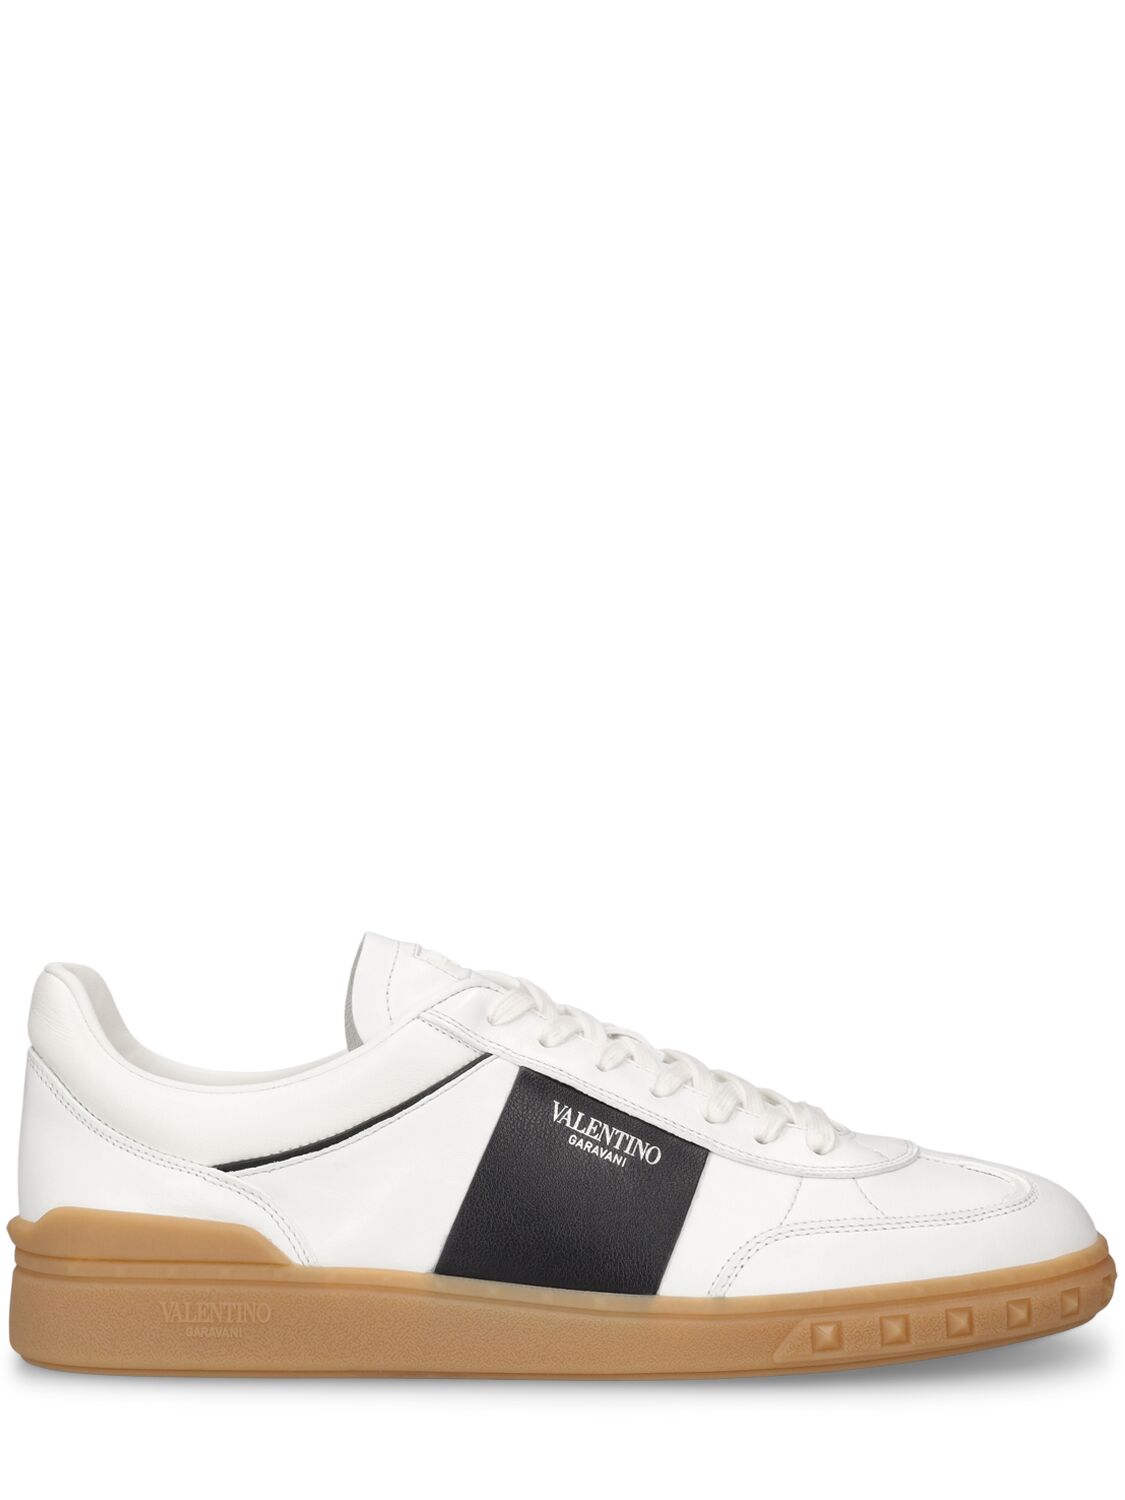 Image of Nappa Leather Sneakers